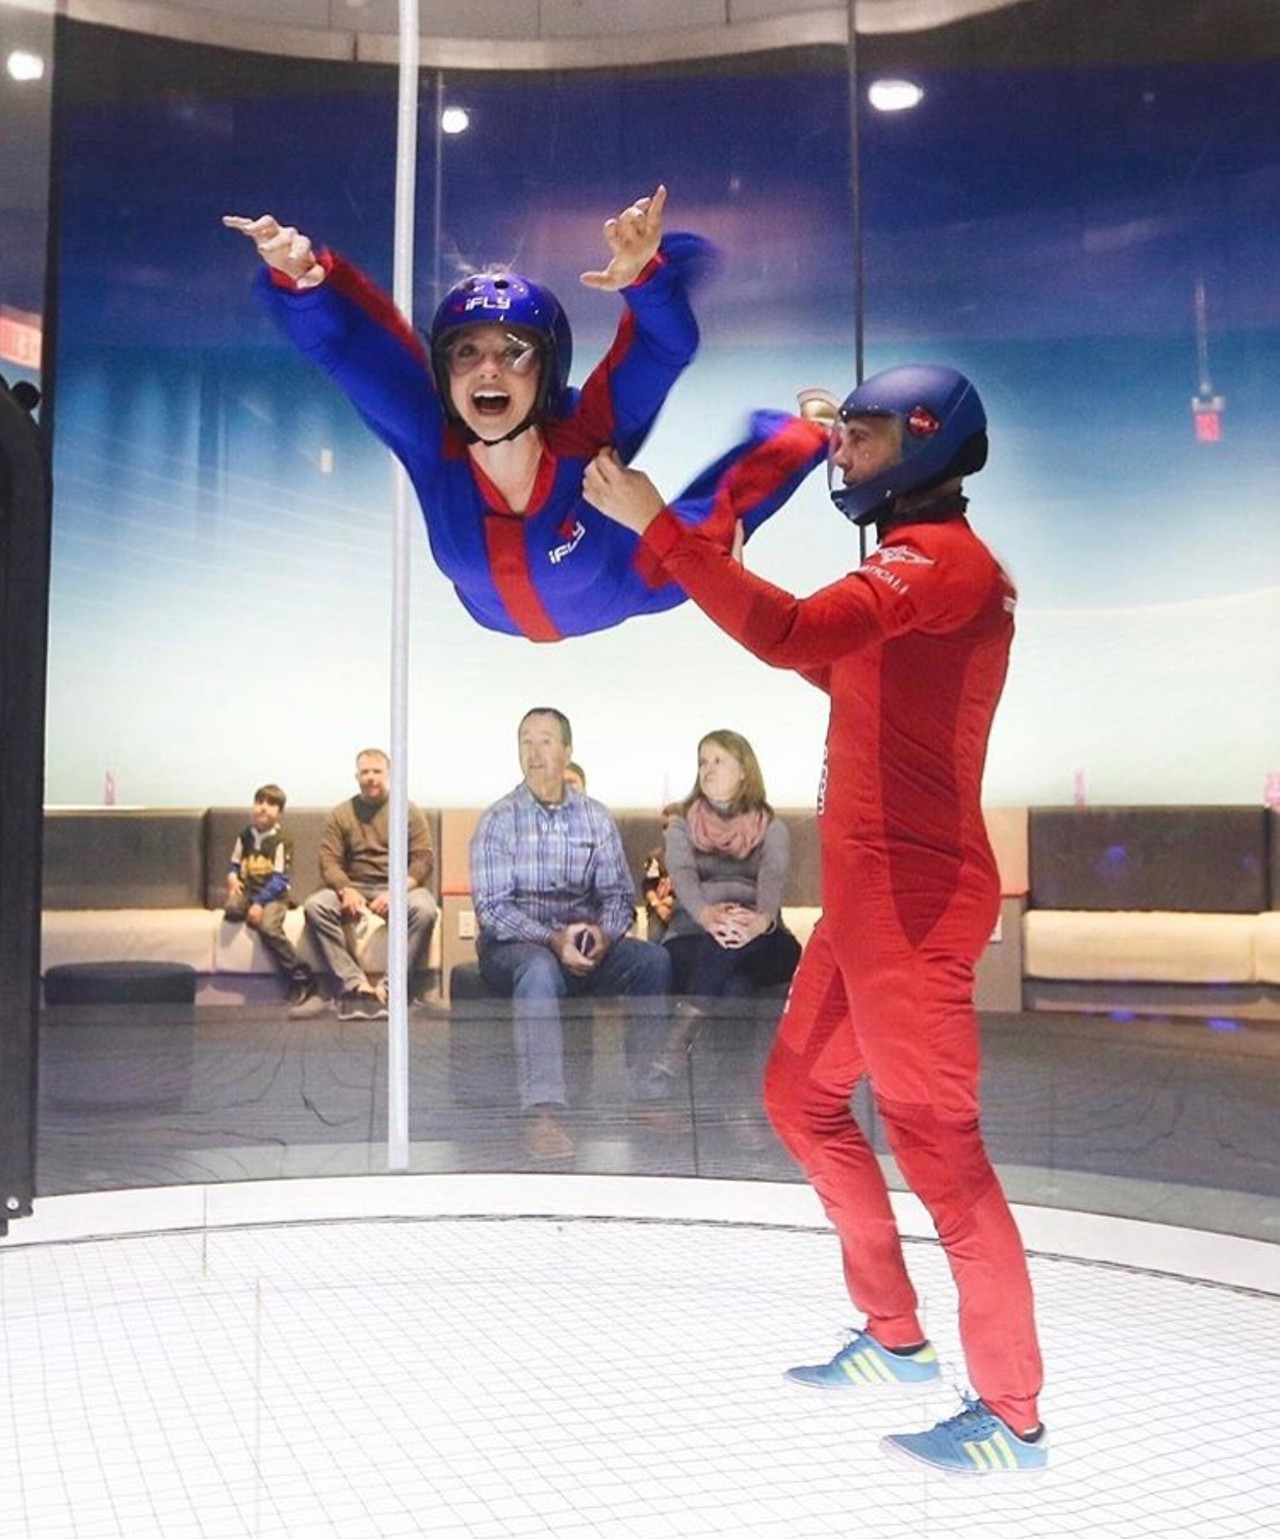 Reach new heights at iFly
15915 I-10, (210) 762-4359, iflyworld.com
Getting active – or at least feeling like you are – doesn’t require you to be outdoors. Let the rain be the perfect chance to head to iFly and take advantage of indoor skydiving. With a jumpsuit and all, you’ll be able to experience an adventure without facing the natural elements.
Photo via Instagram / lovetaymack